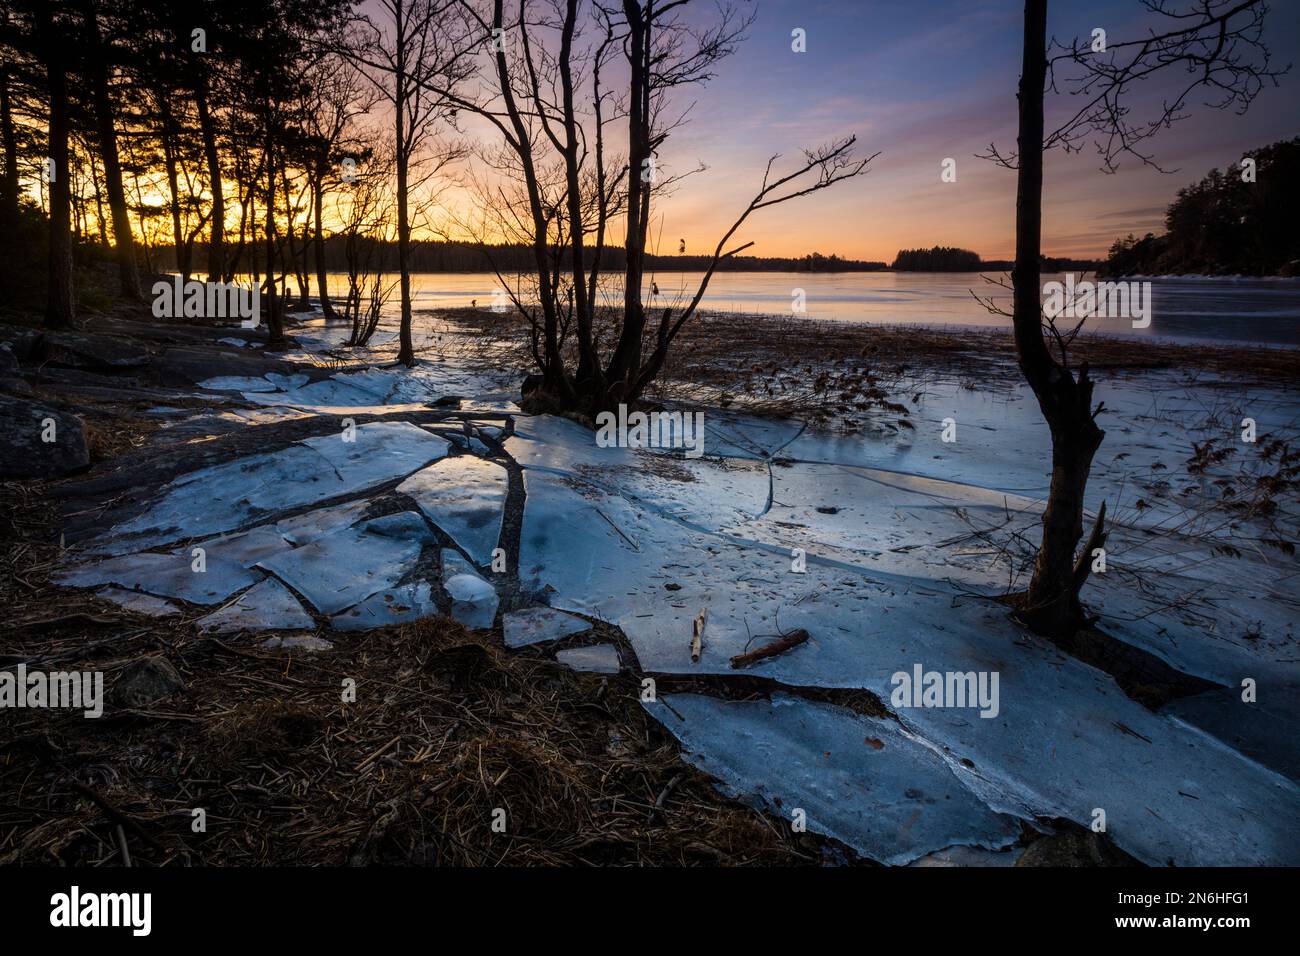 Ice formations and early morning winter sunrise by the lake Vansjø, Østfold, Norway, Scandinavia. Stock Photo